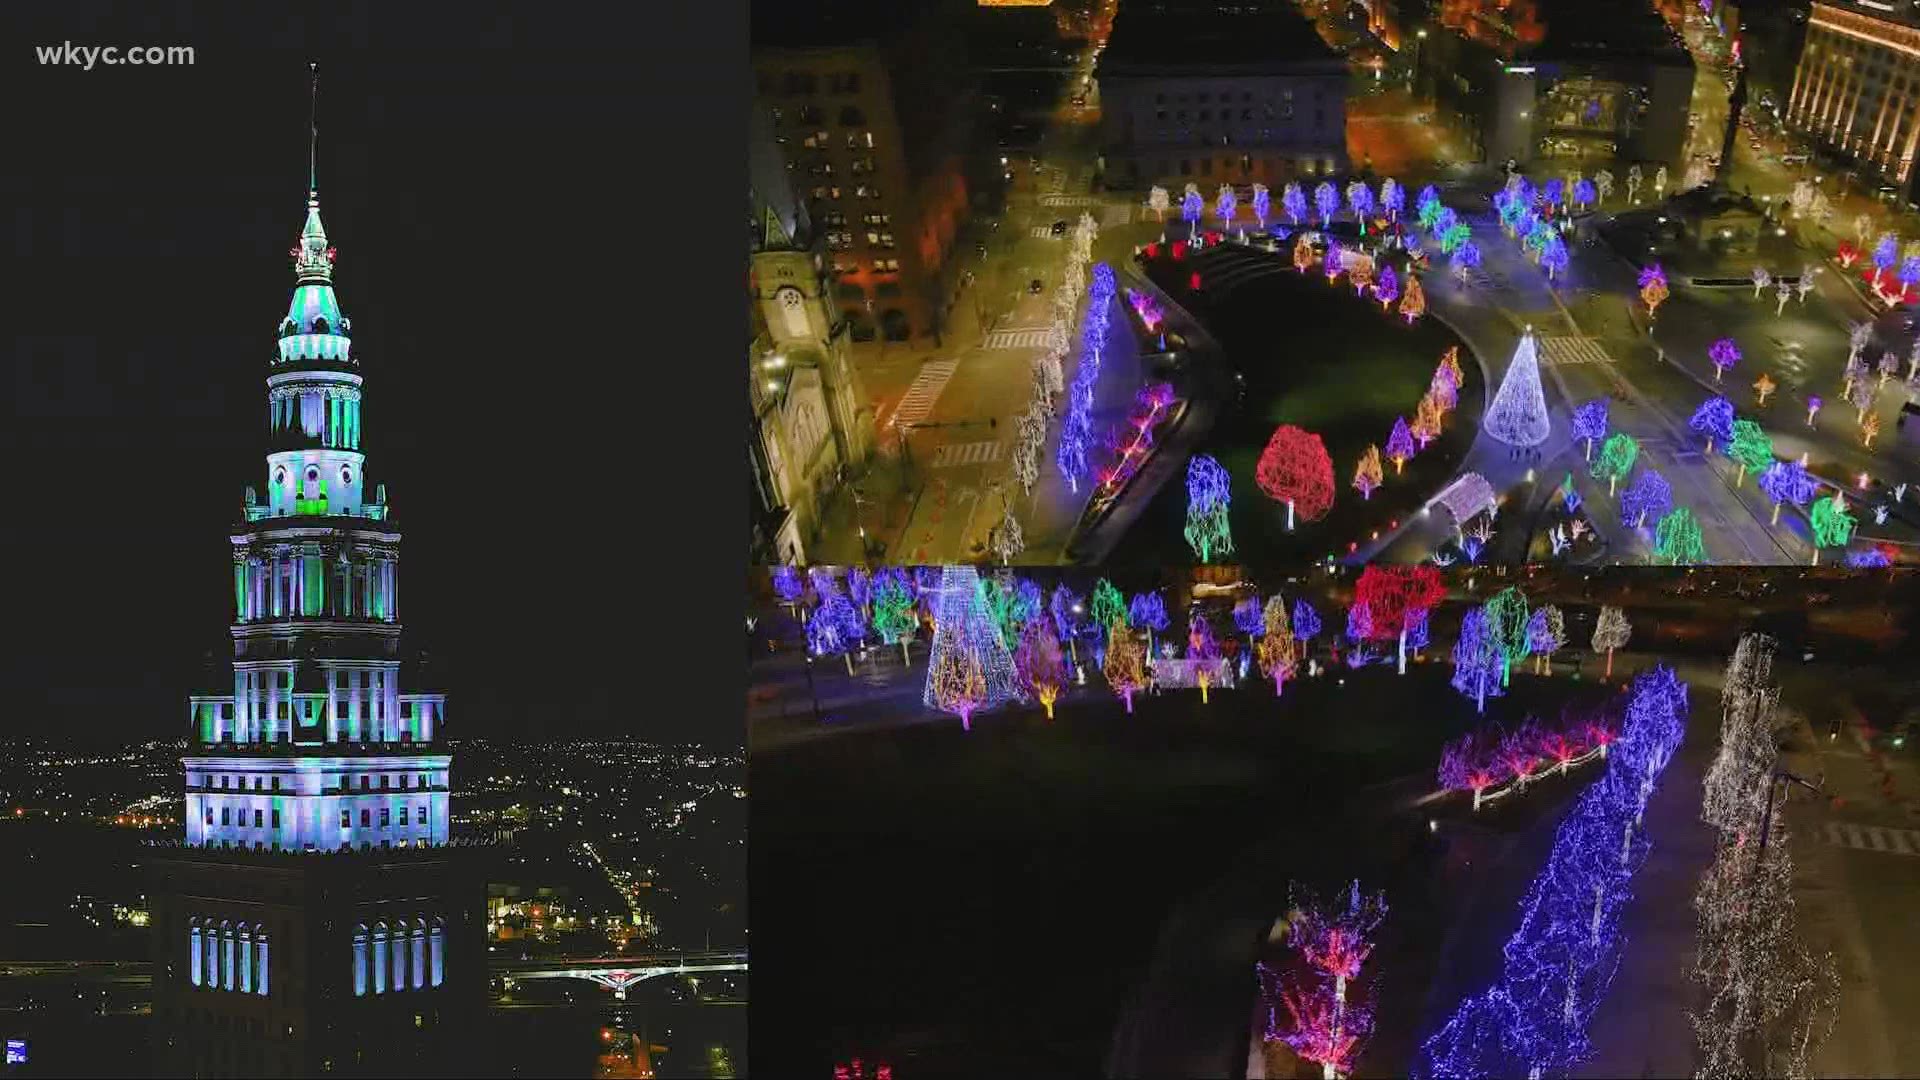 The holidays are upon us and the downtown Cleveland Alliance is kicking off the season with their annual lighting ceremony at Winterfest. Andrew Horansky reports.